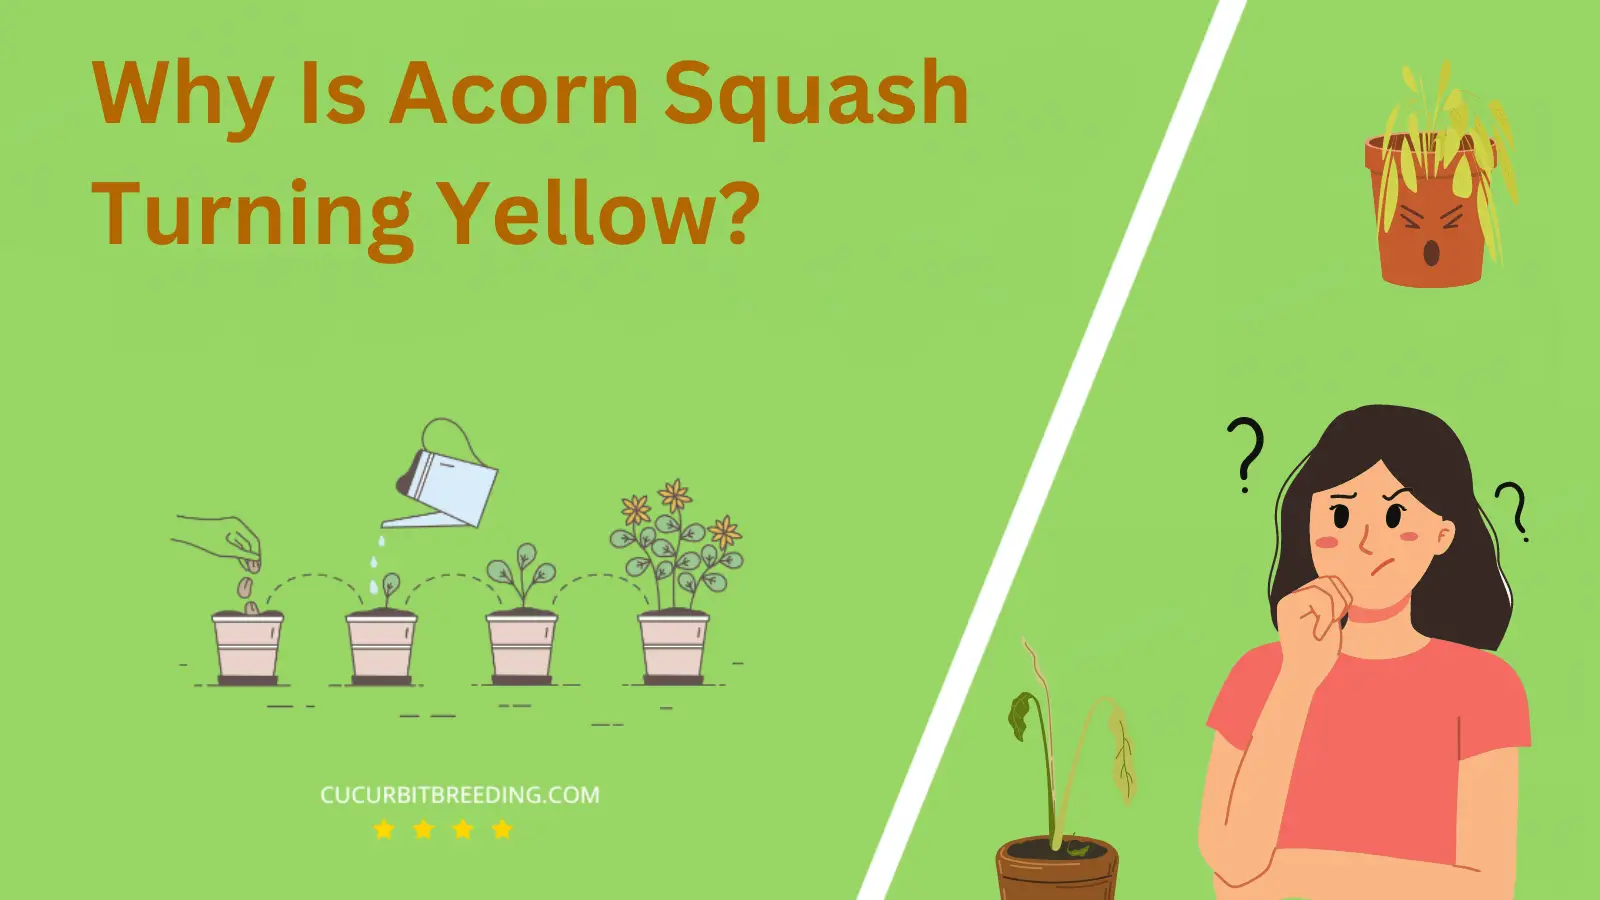 Why Is Acorn Squash Turning Yellow